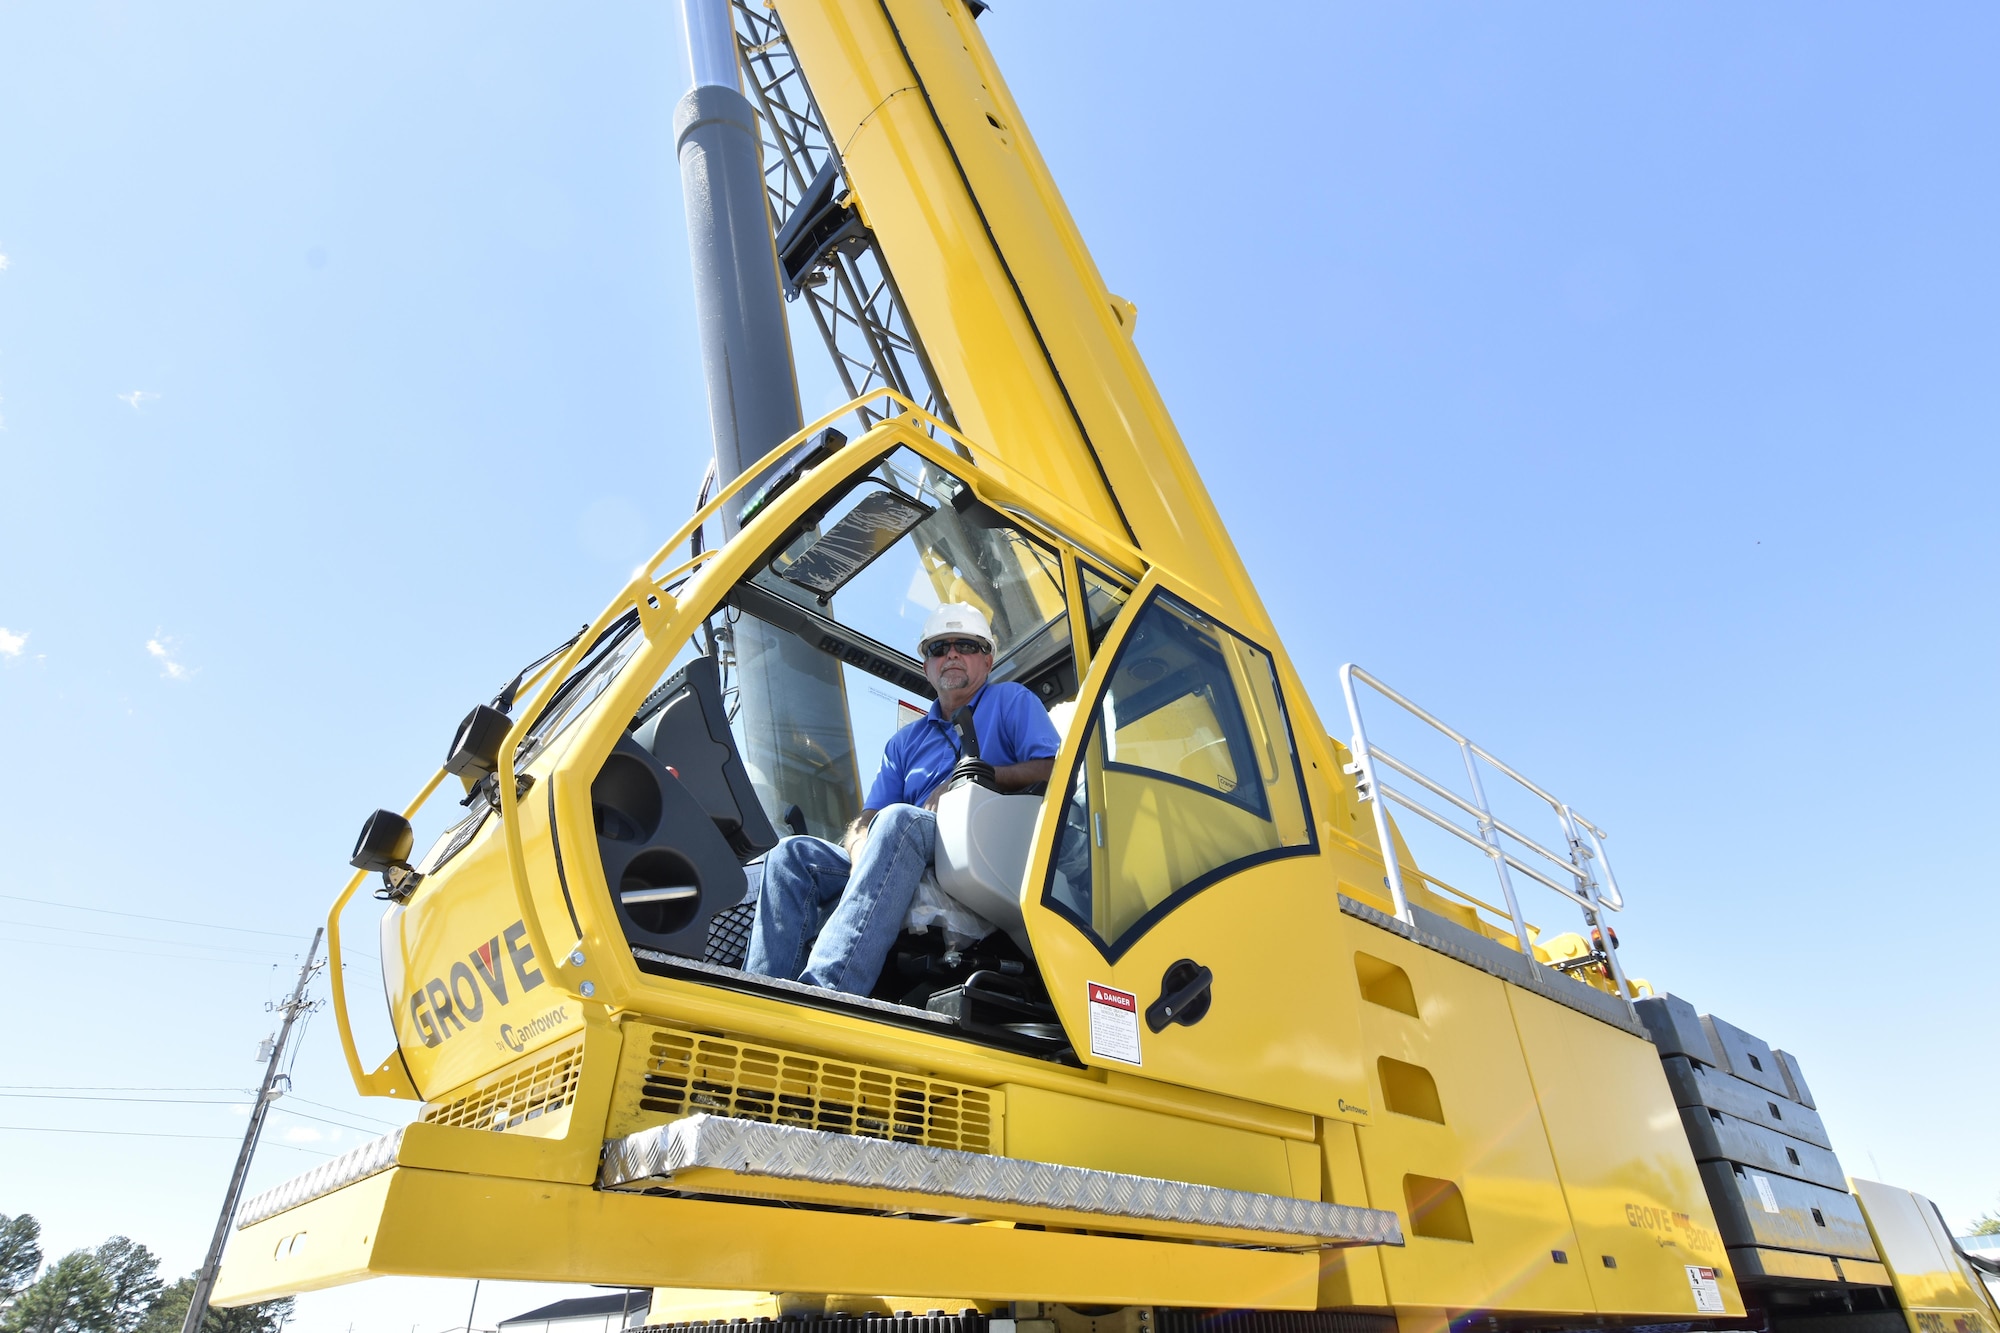 Barry McWhorter, crane operator at Arnold Air Force Base, tries out the new crane purchased to perform maintenance and repair of Arnold AFB support assets. The crane arrived at Arnold AFB on April 28. (U.S. Air Force photo/Rick Goodfriend) 